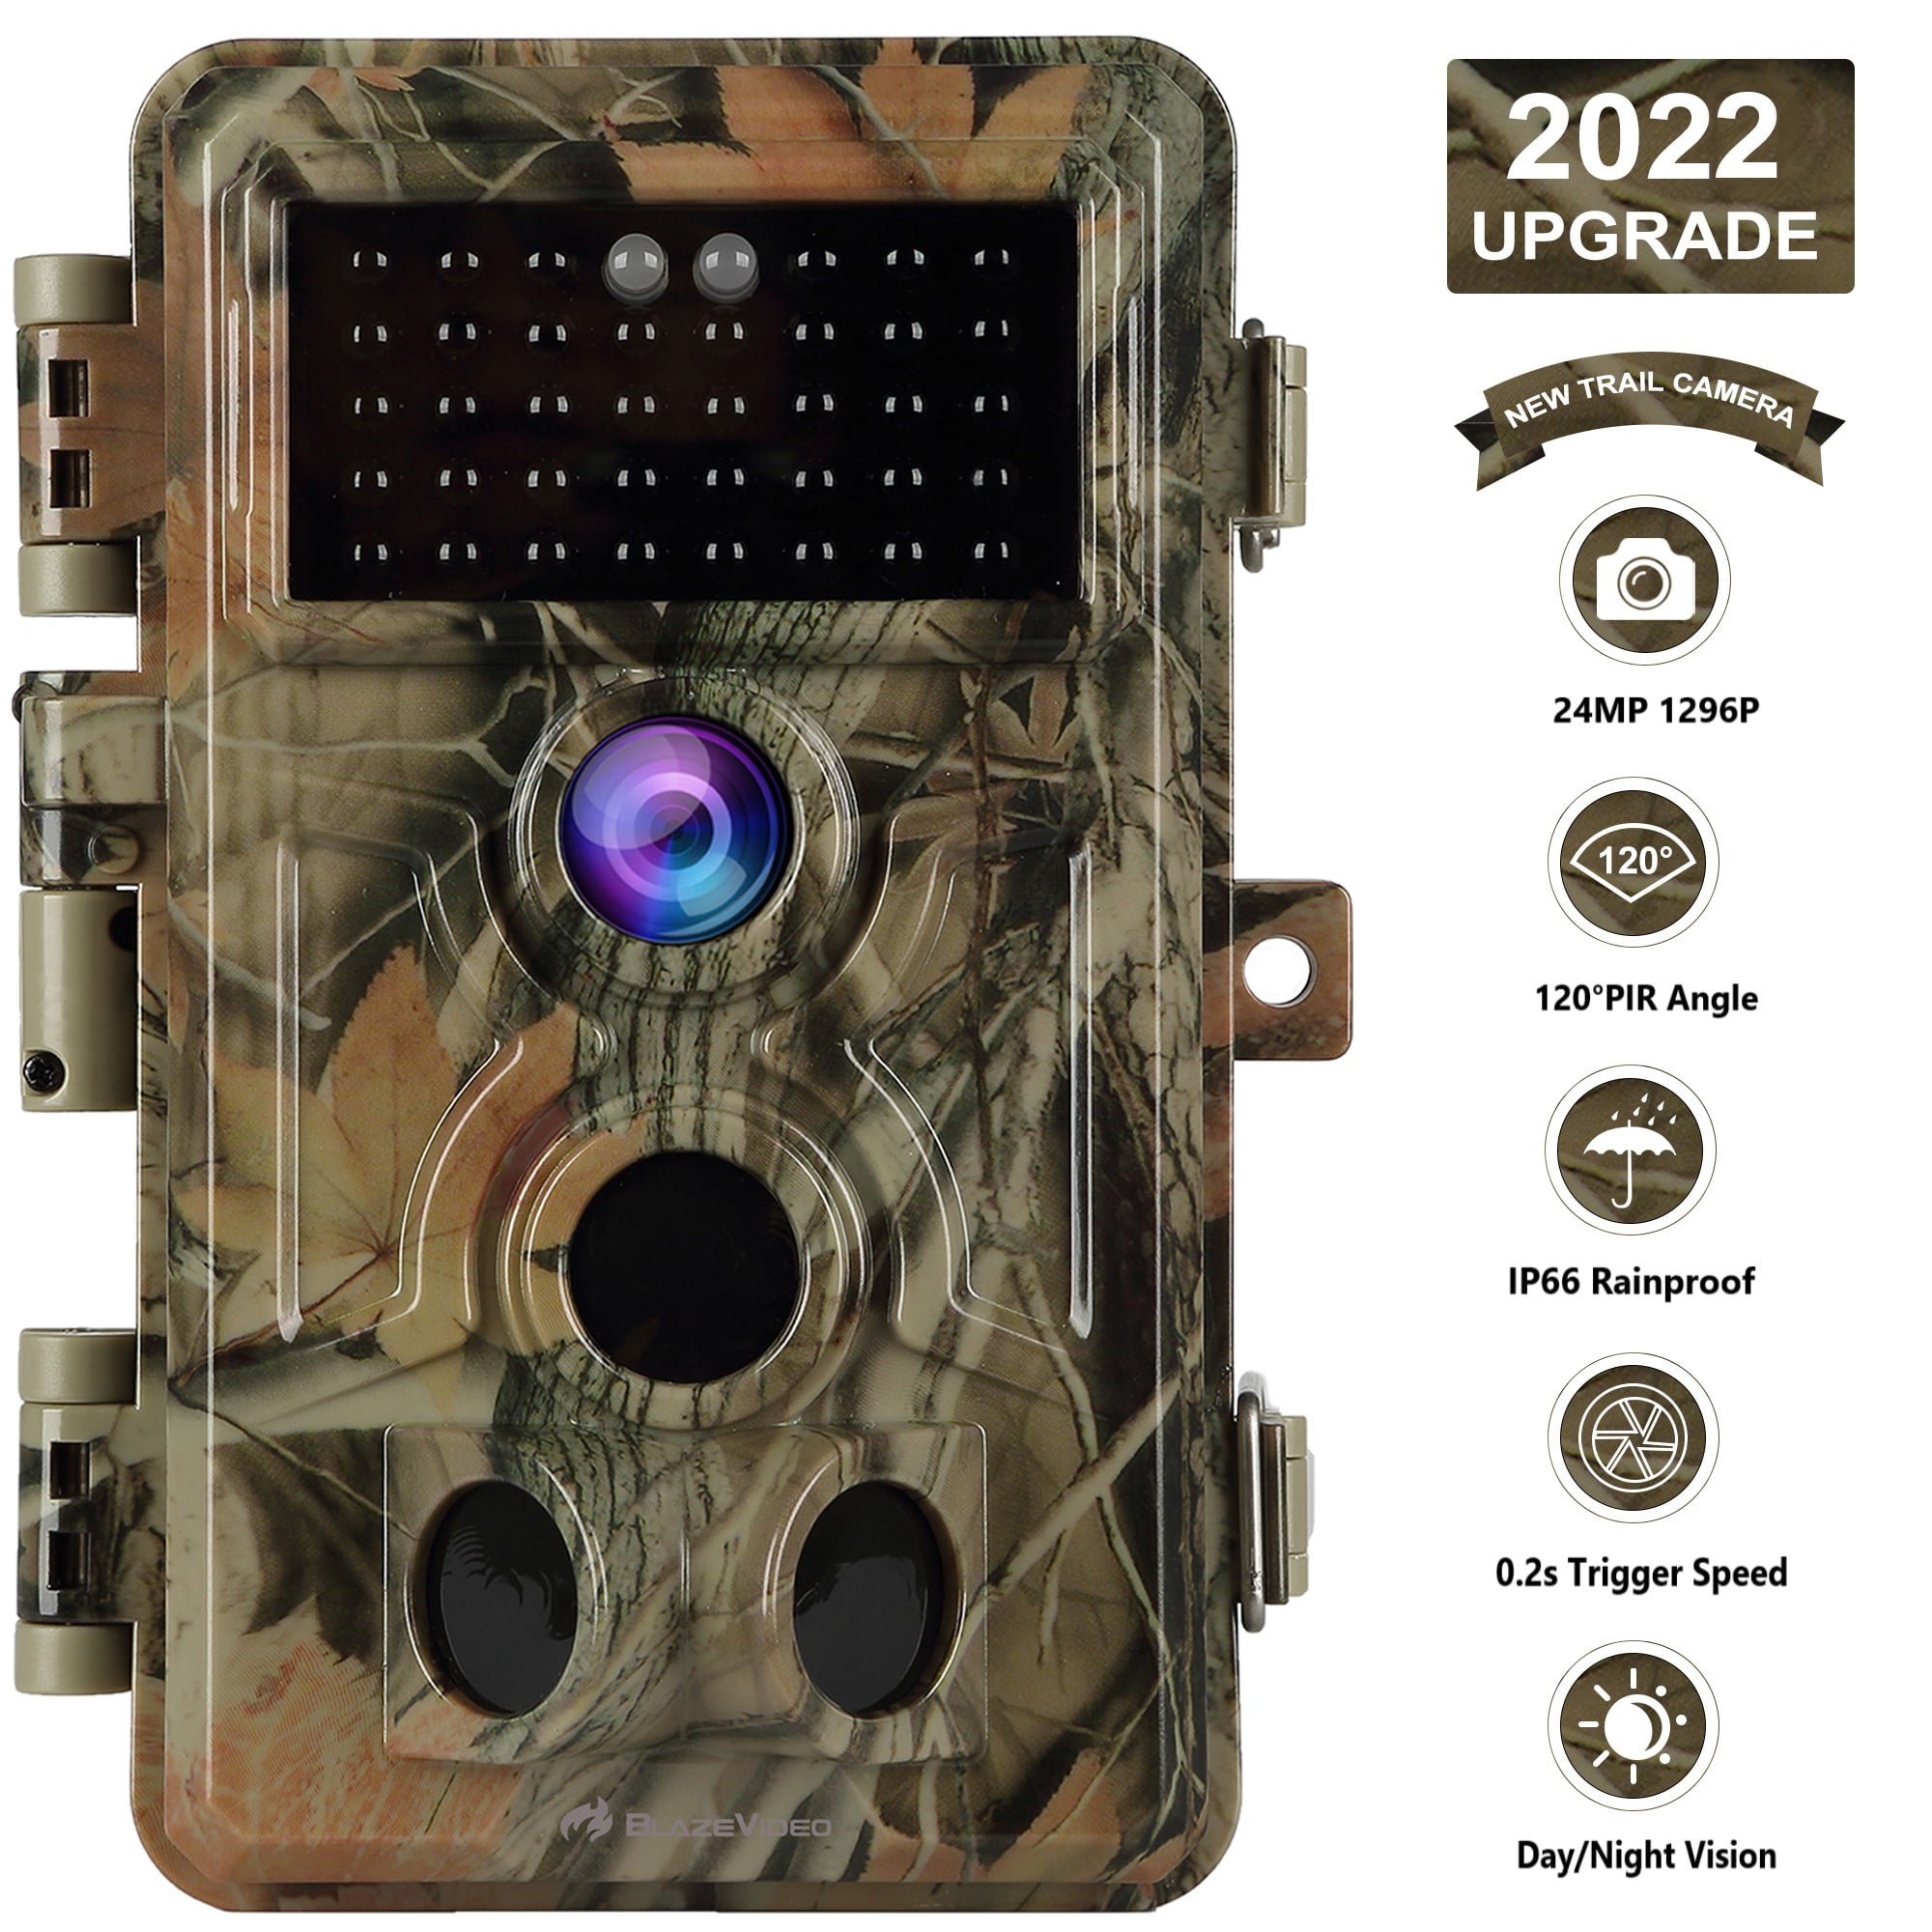 16MP FULL HD Hunting Trail Camera Farm Home Scouting 0.2S Trigger Night Vision 